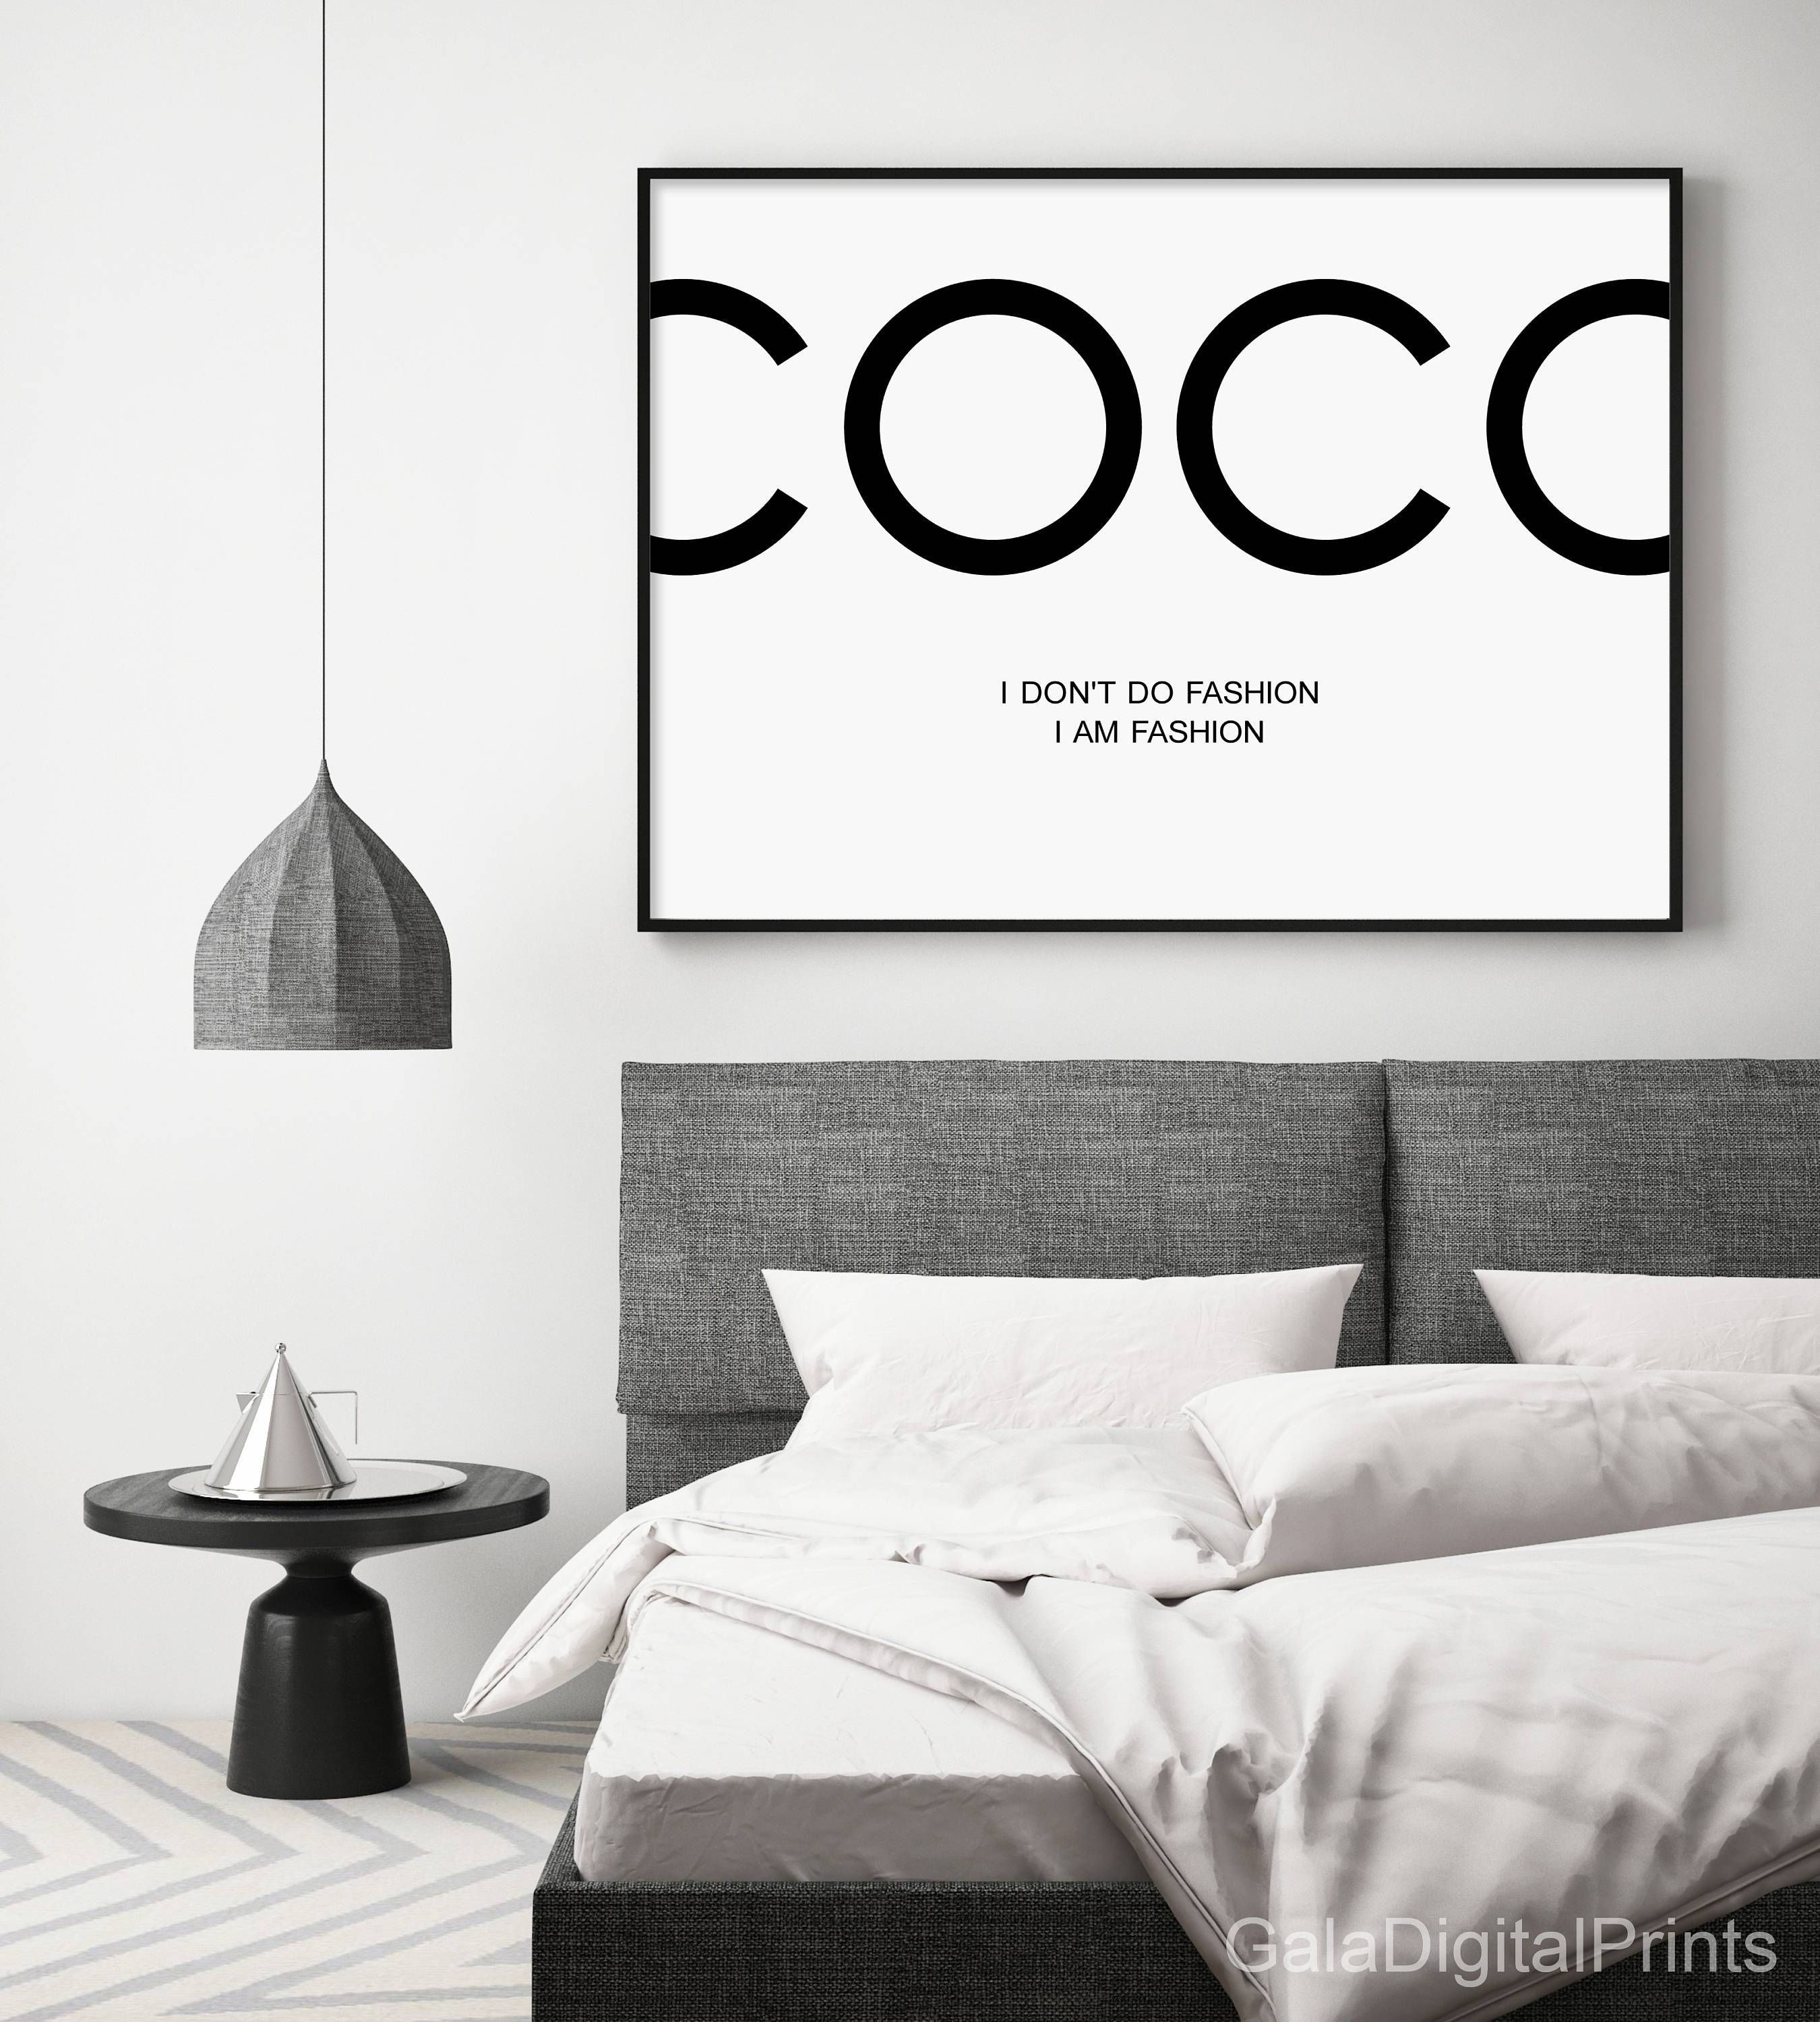 Coco Chanel Coco Chanel Poster Coco Chanel Print Coco Intended For Most Popular Coco Chanel Wall Decals (View 11 of 25)